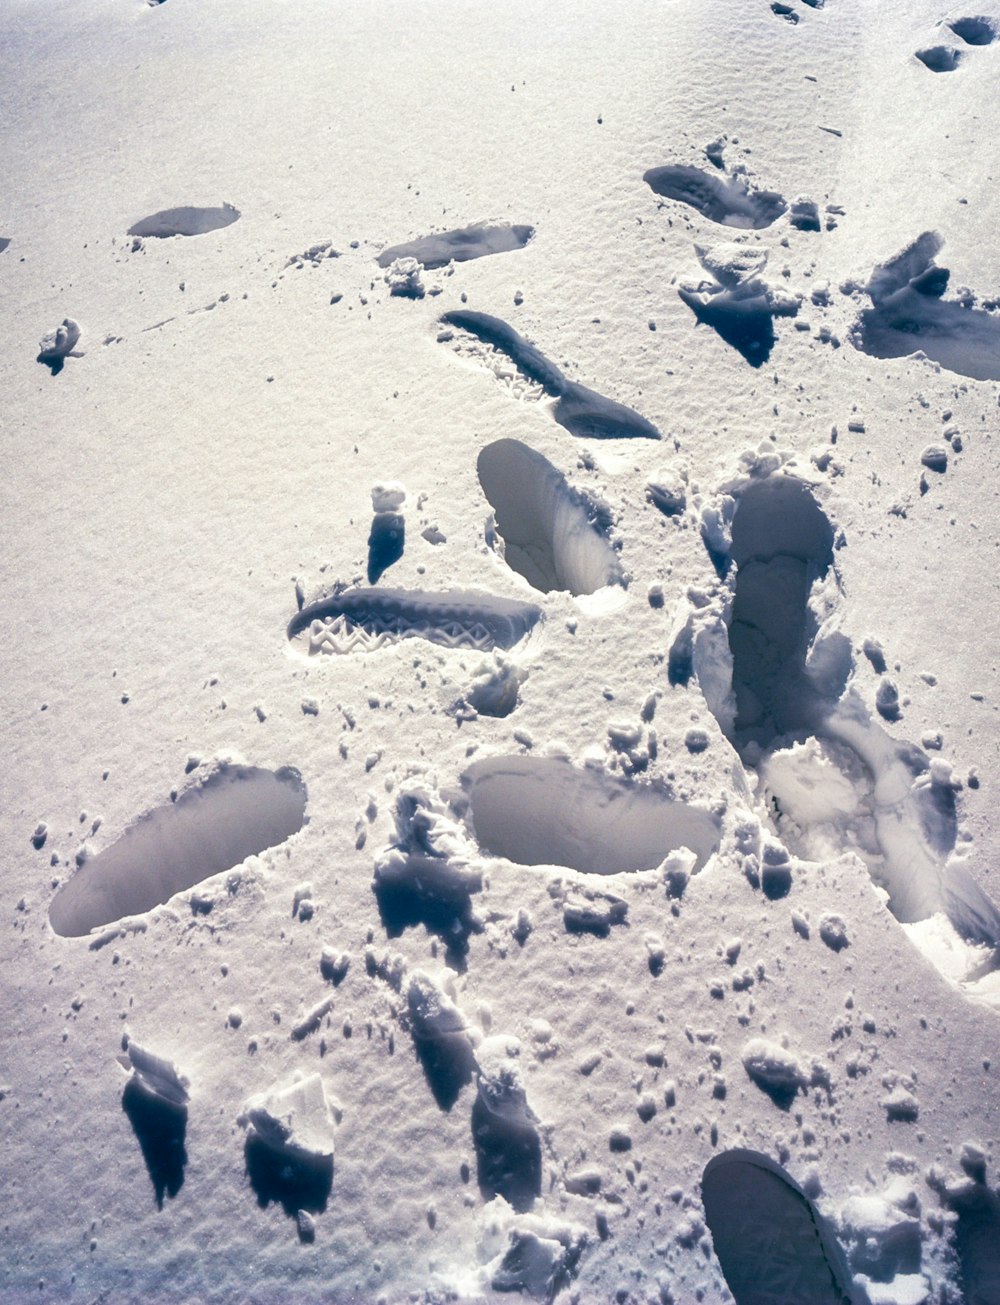 footprints in the snow on a sunny day